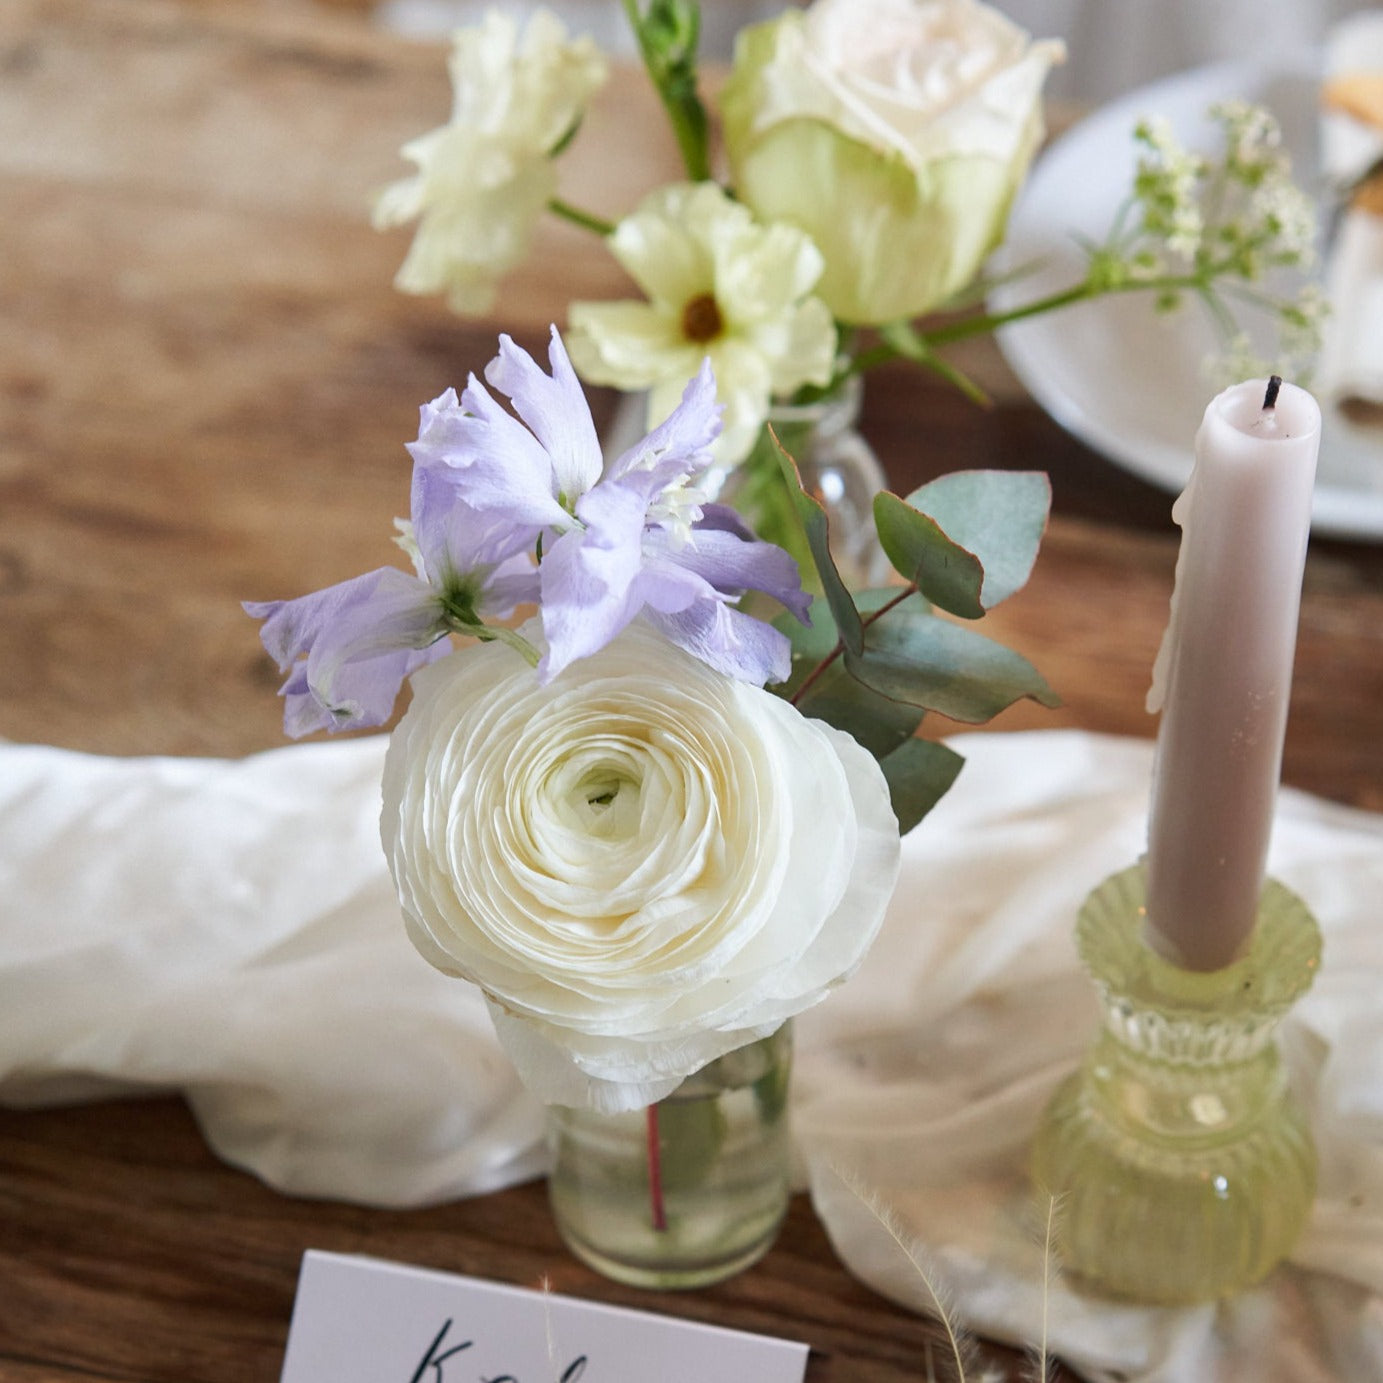 pastel wildflowers in milk bottles to decorate wedding venue and dining table